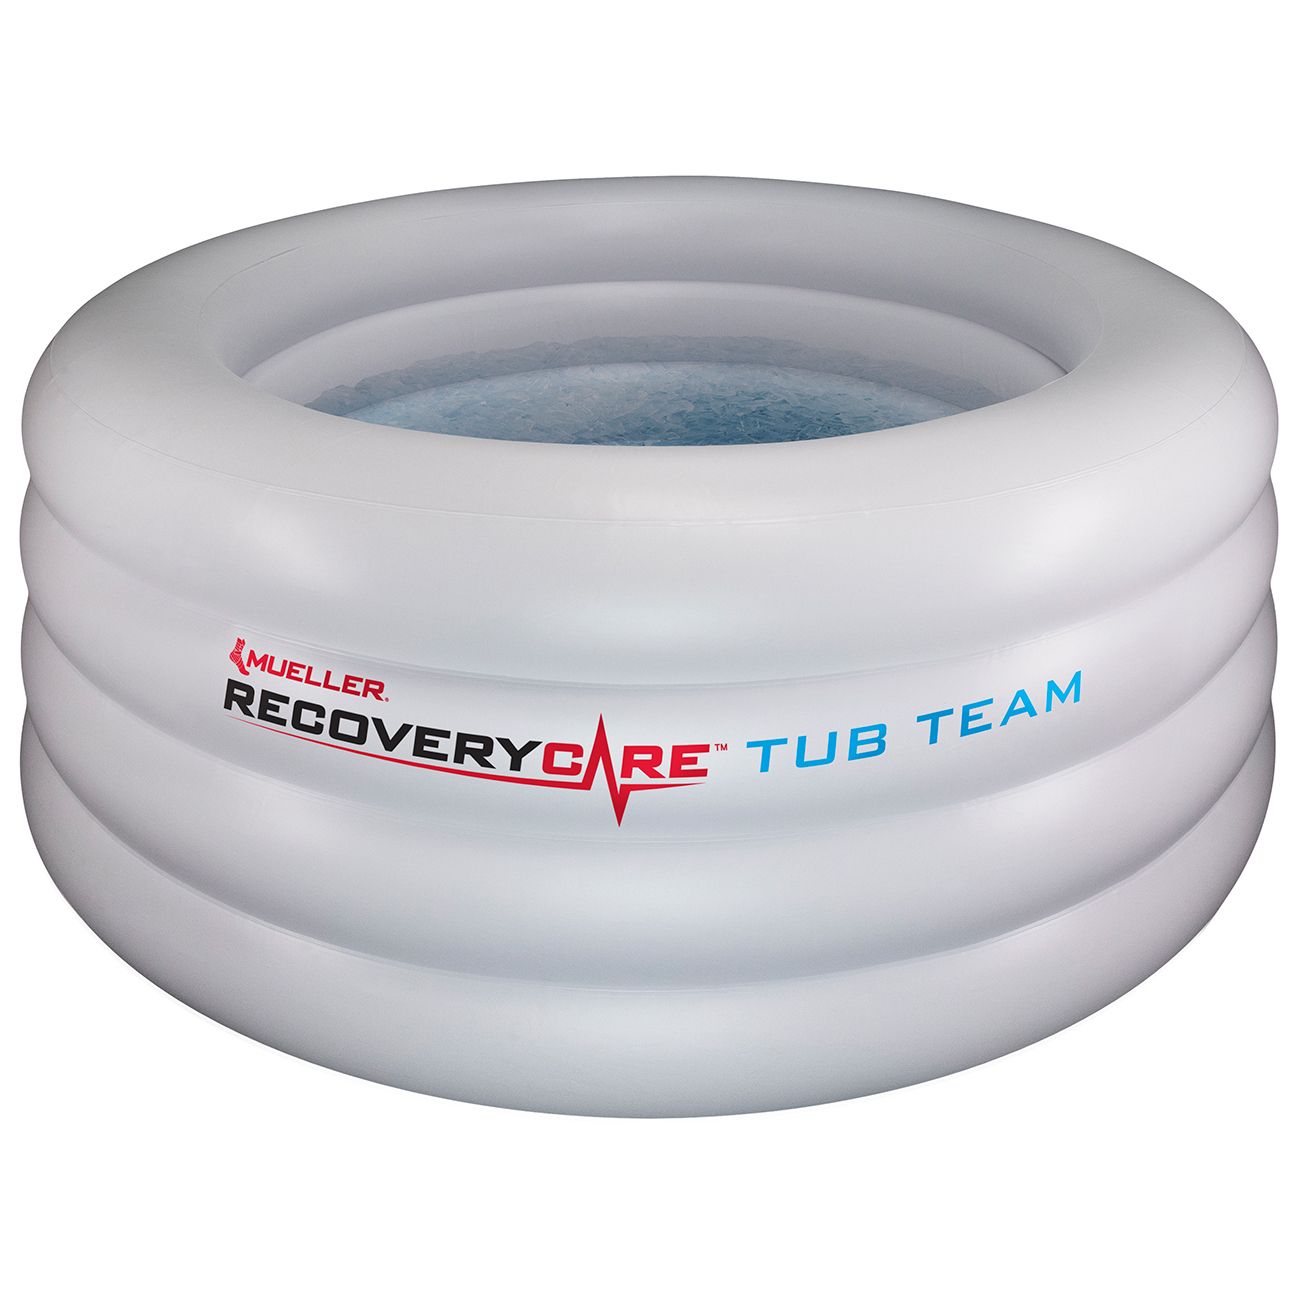 Mueller Recovery Care Team Tub